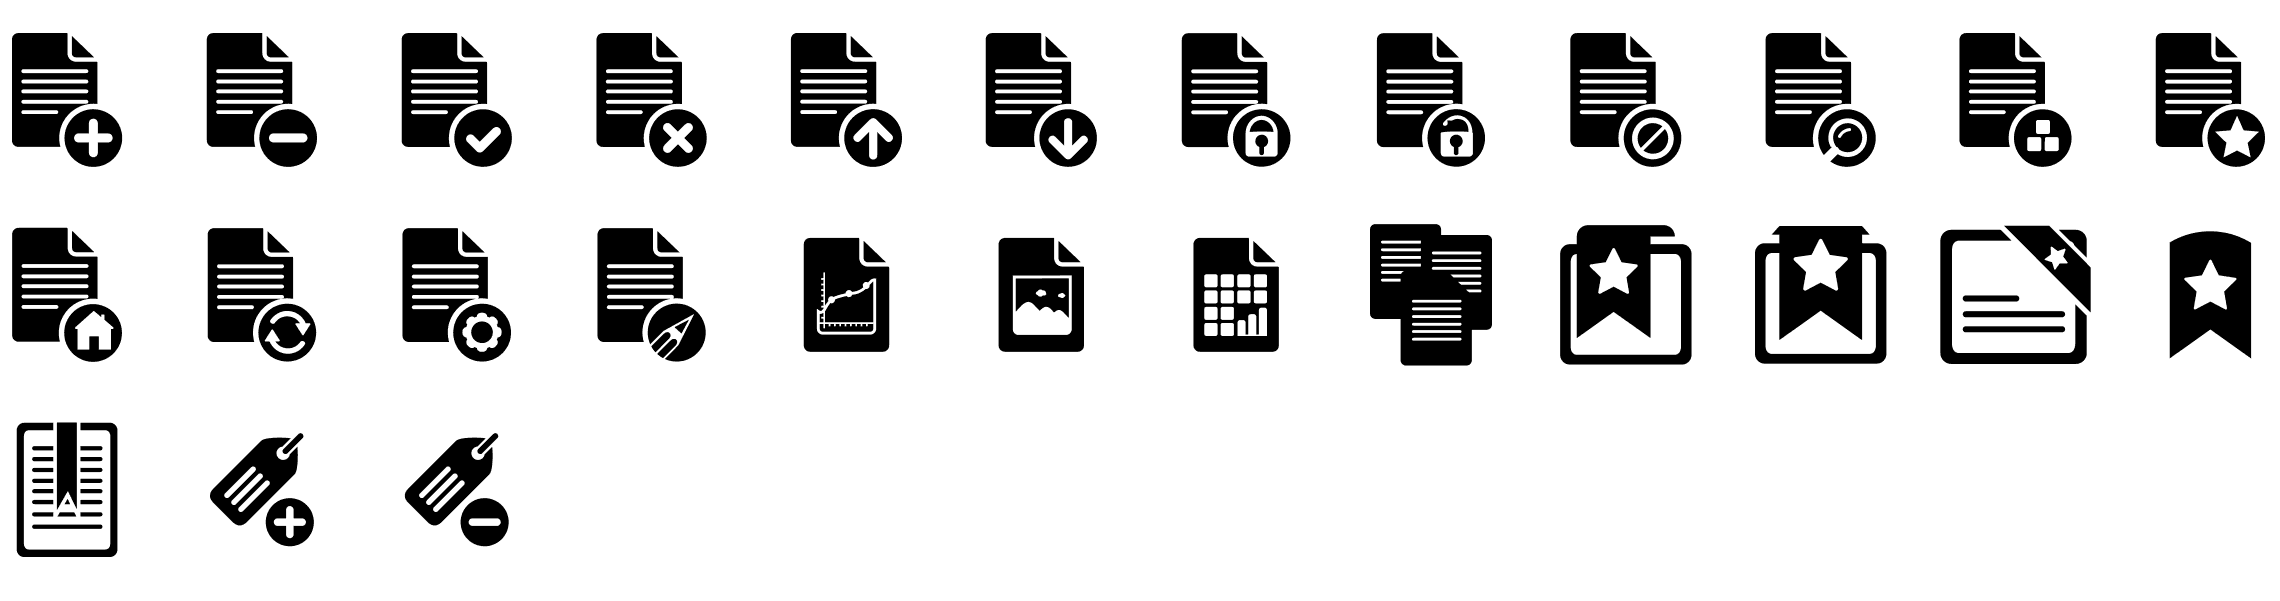 documents-glyph-icons-preview